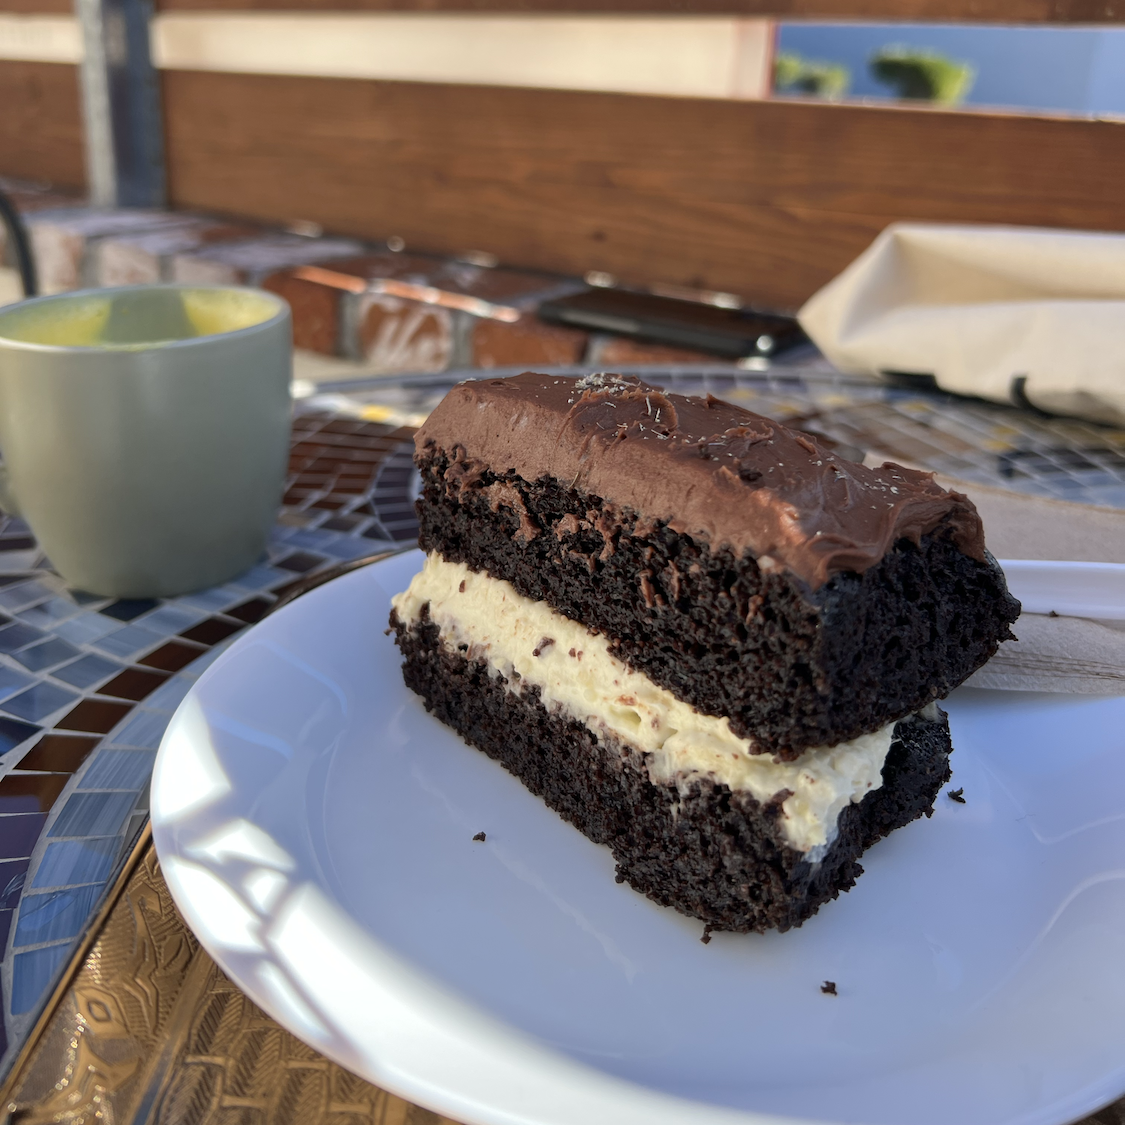 Chocolate Lavender Cake from local cafe Makani Coffeehouse in Rolando